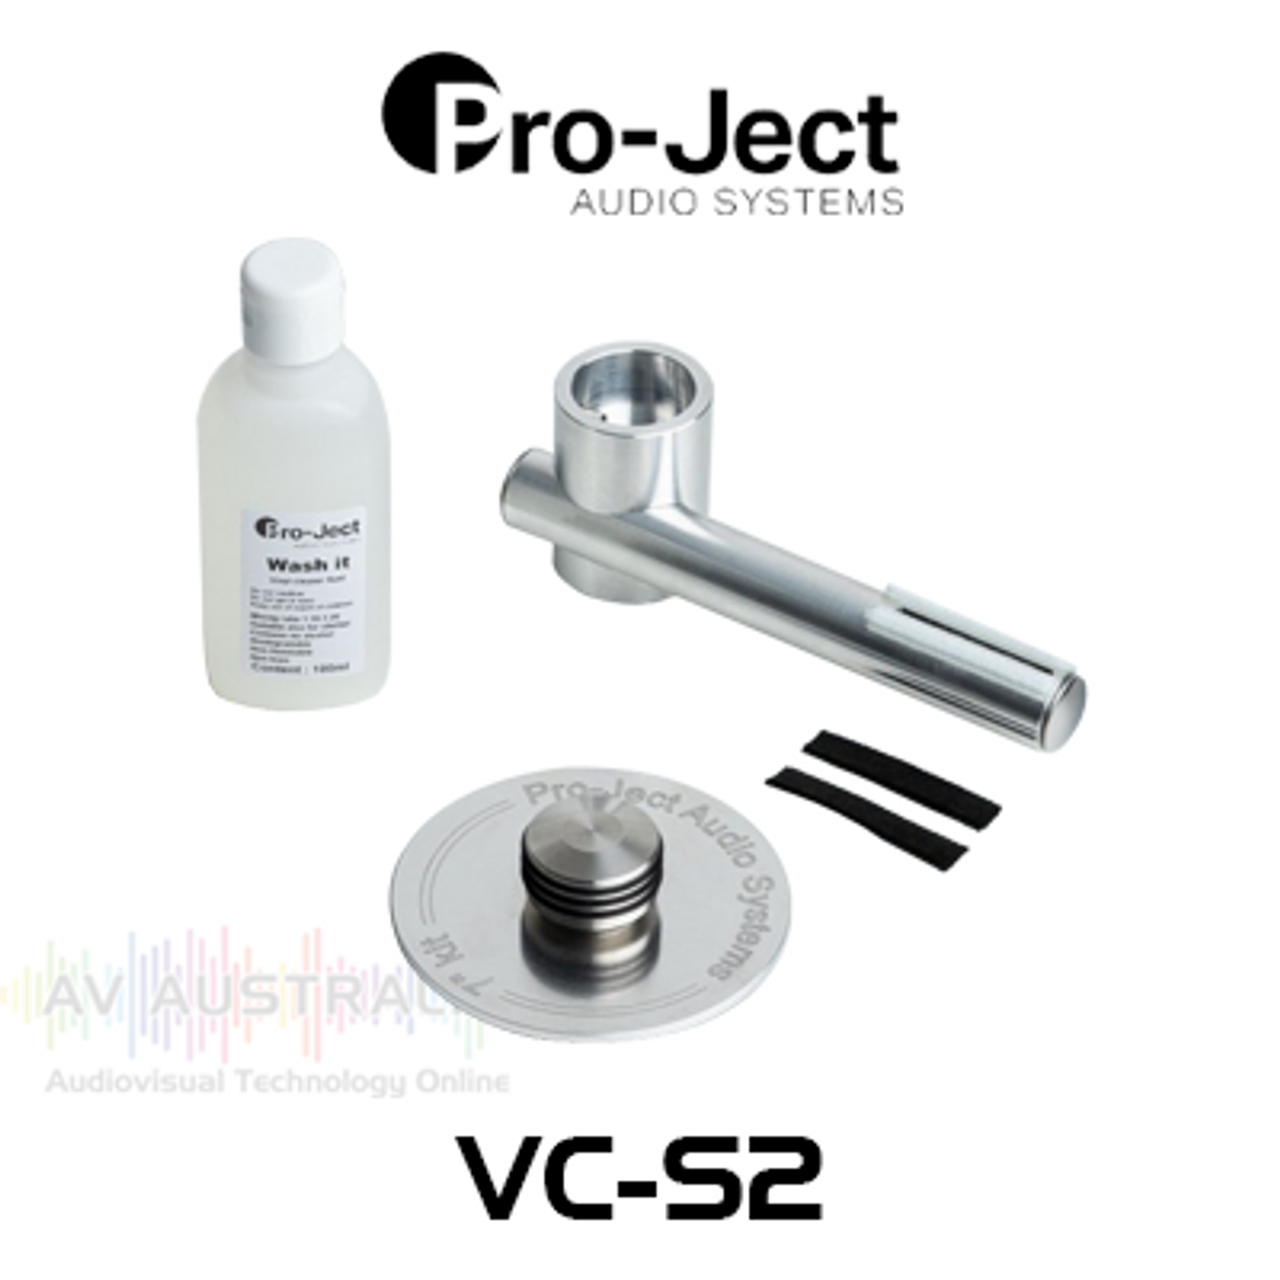 Pro-Ject VC-S2 7" Record Cleaning Kit